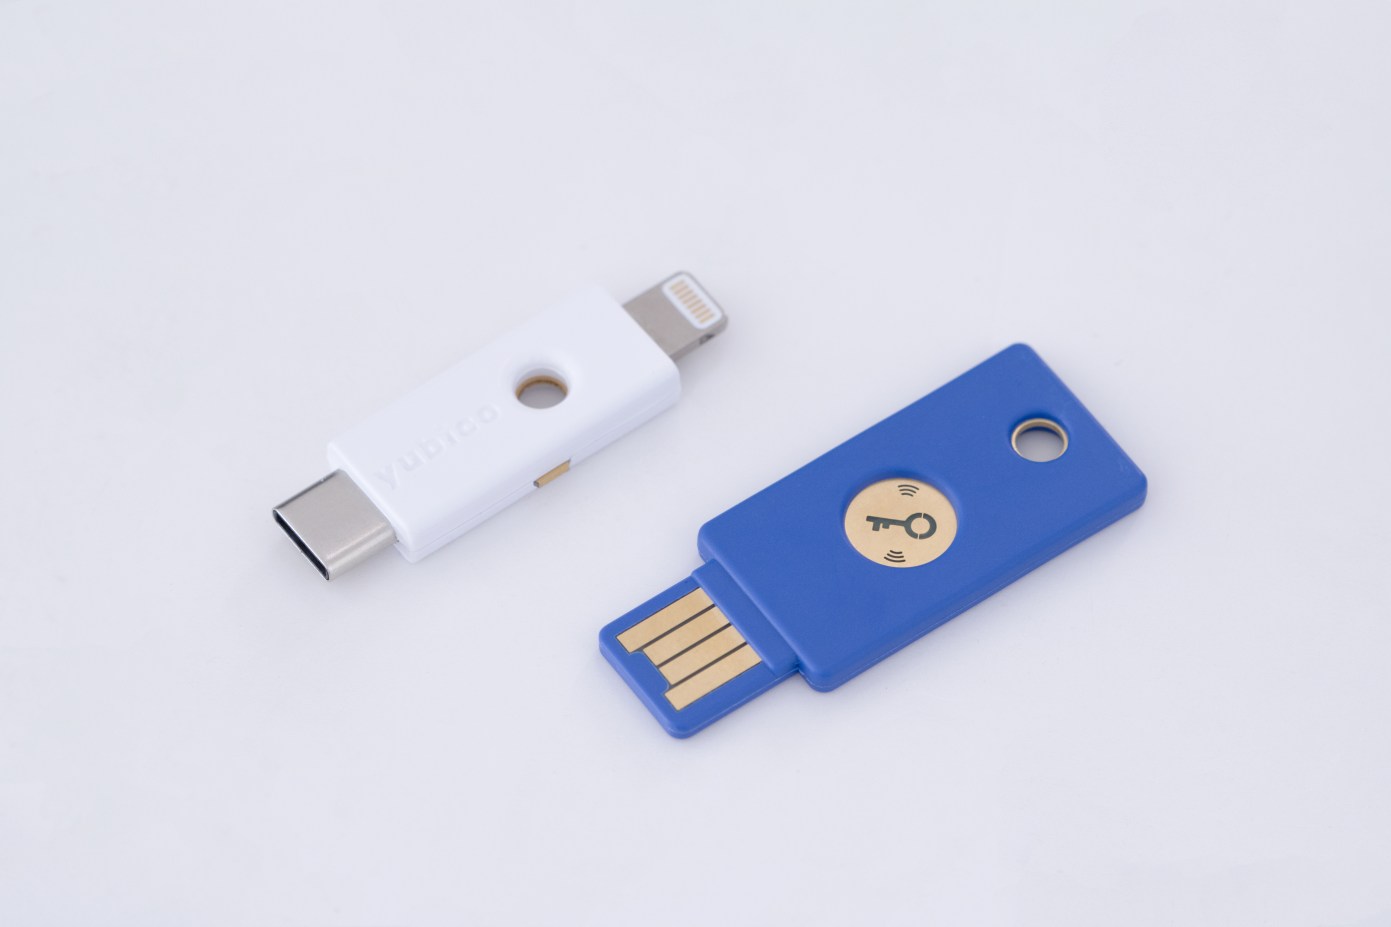 yubico launches a new nfc security key and preps iphone support 1